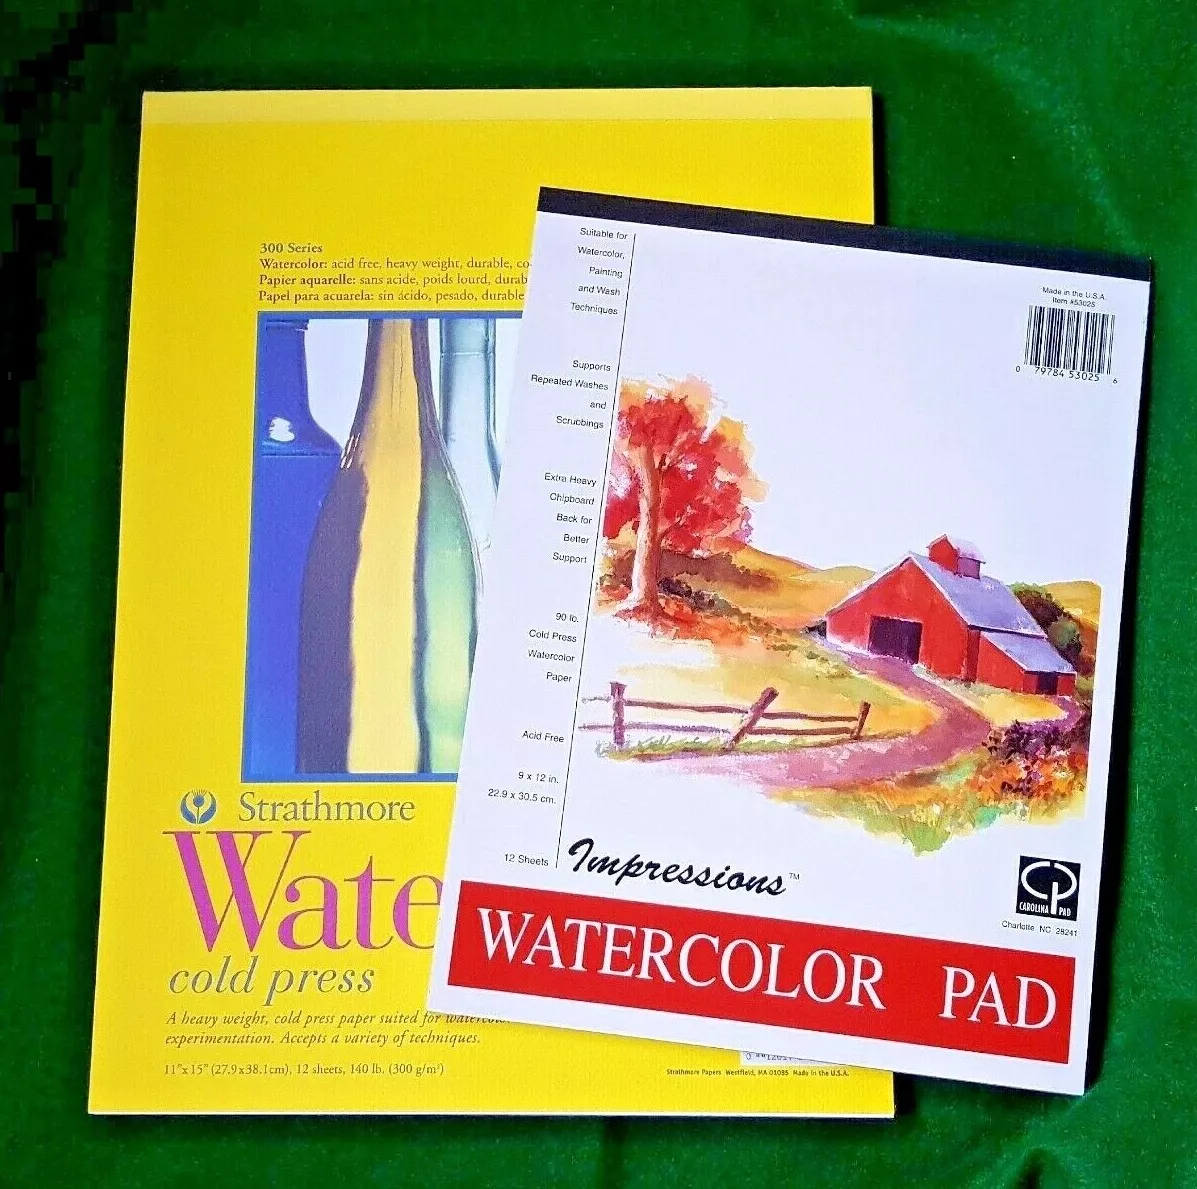 Strathmore 300 Series Watercolor Paper 11”x 15 Cold Press Pads 12 Sheets